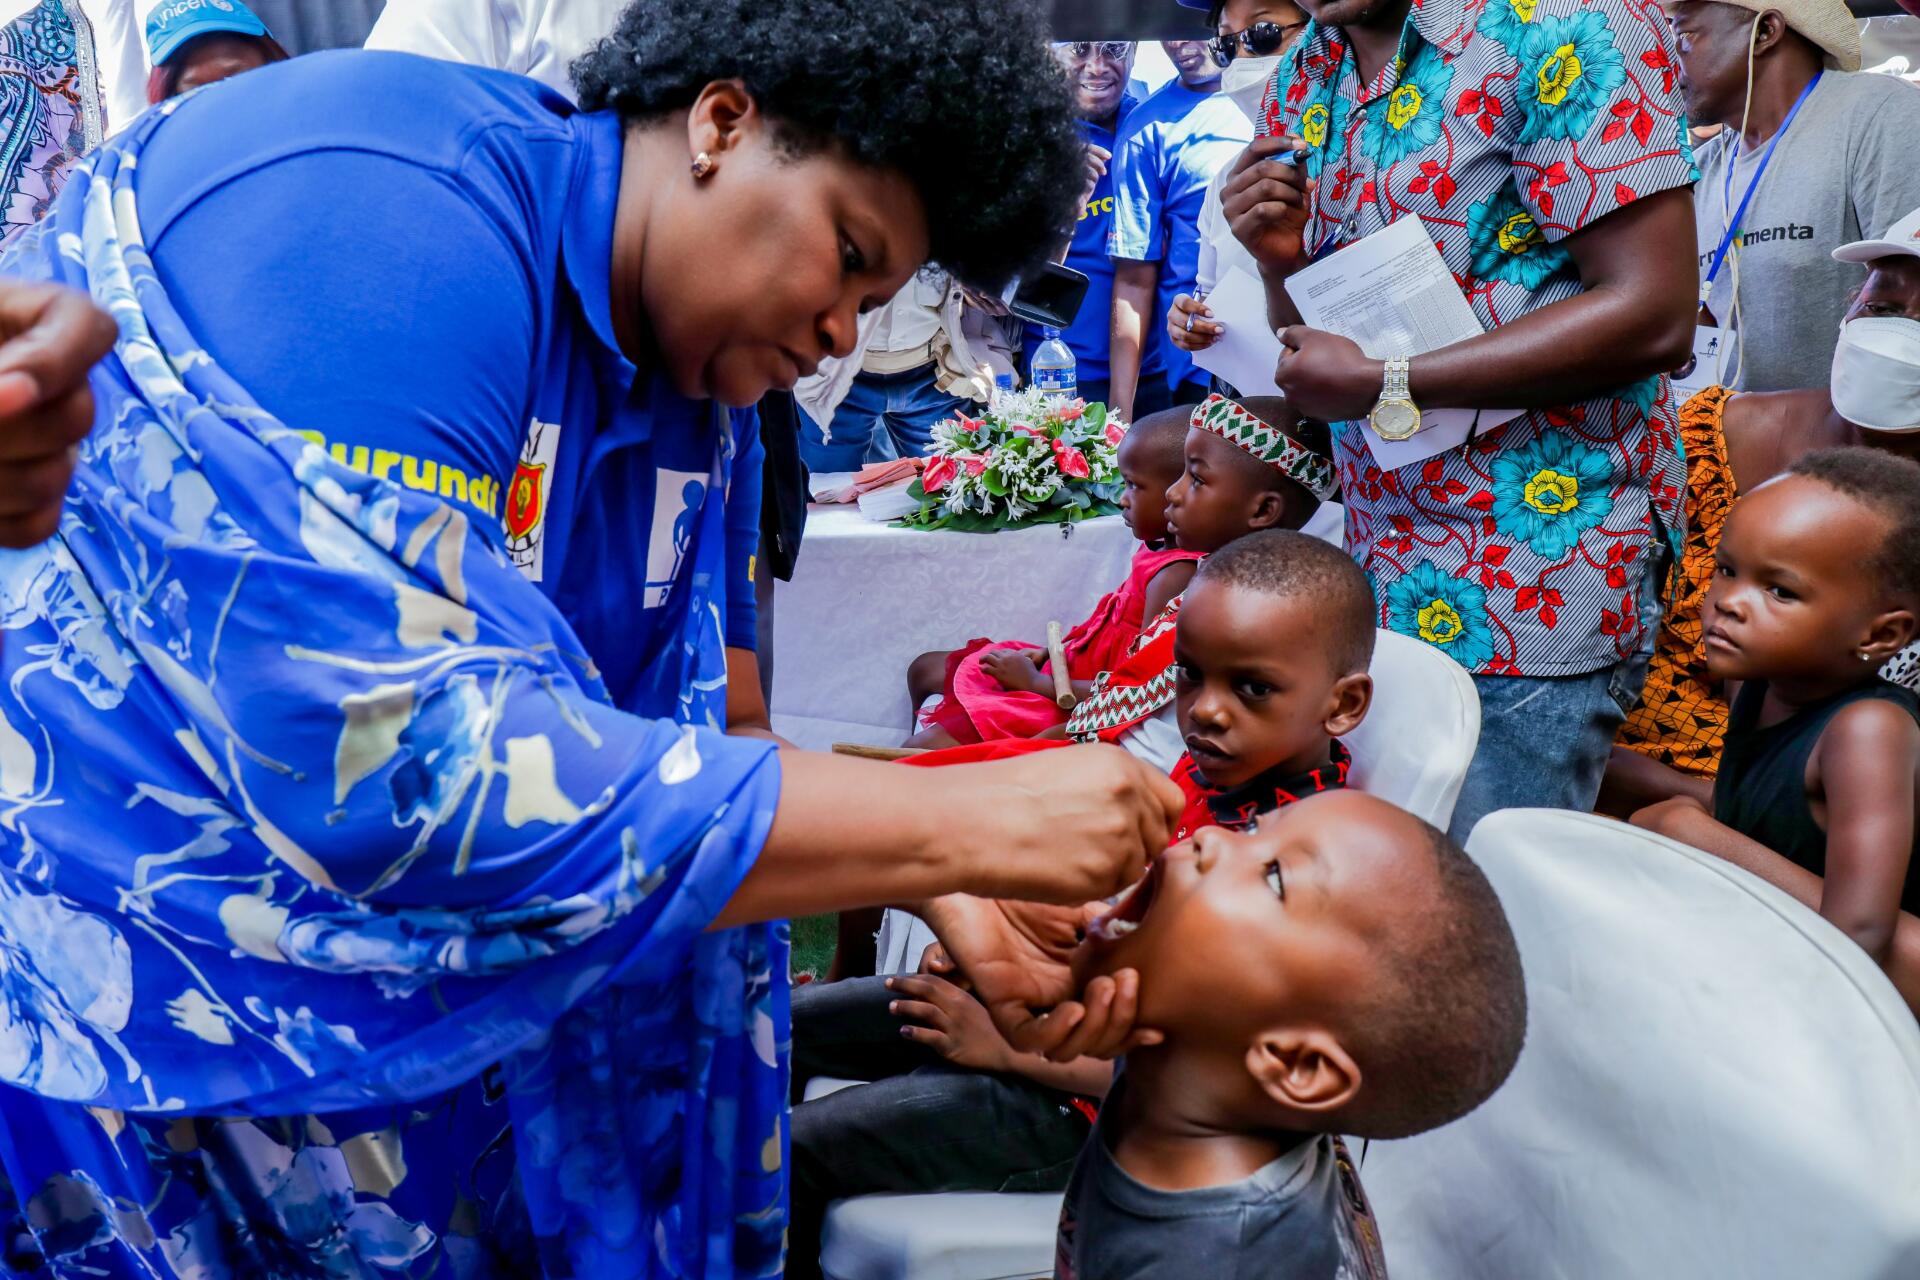 Burundi Health Minister Dr Sylvie Nzeyimana gives an oral polio vaccine to a child